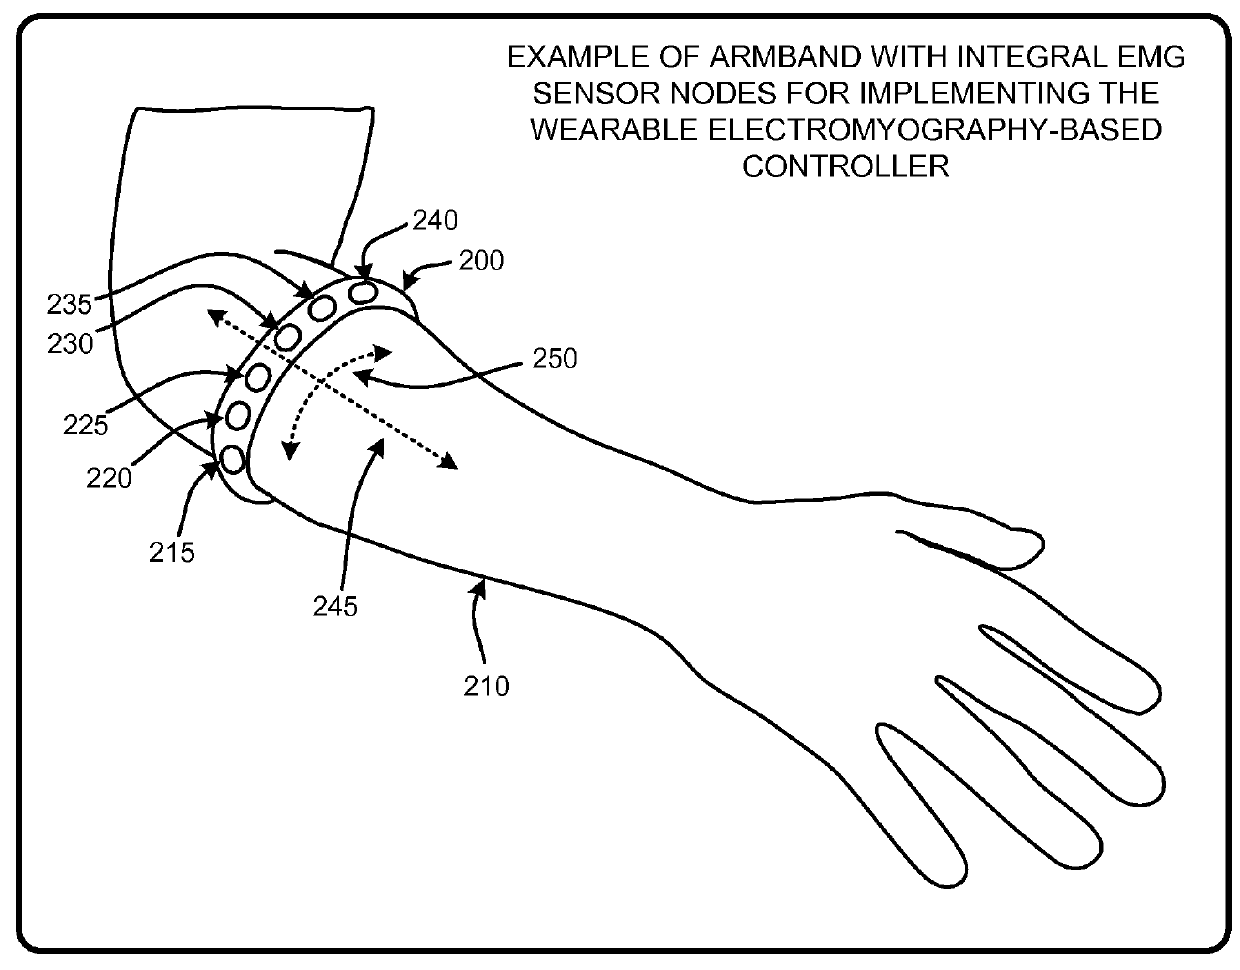 Wearable electromyography-based controllers for human-computer interface